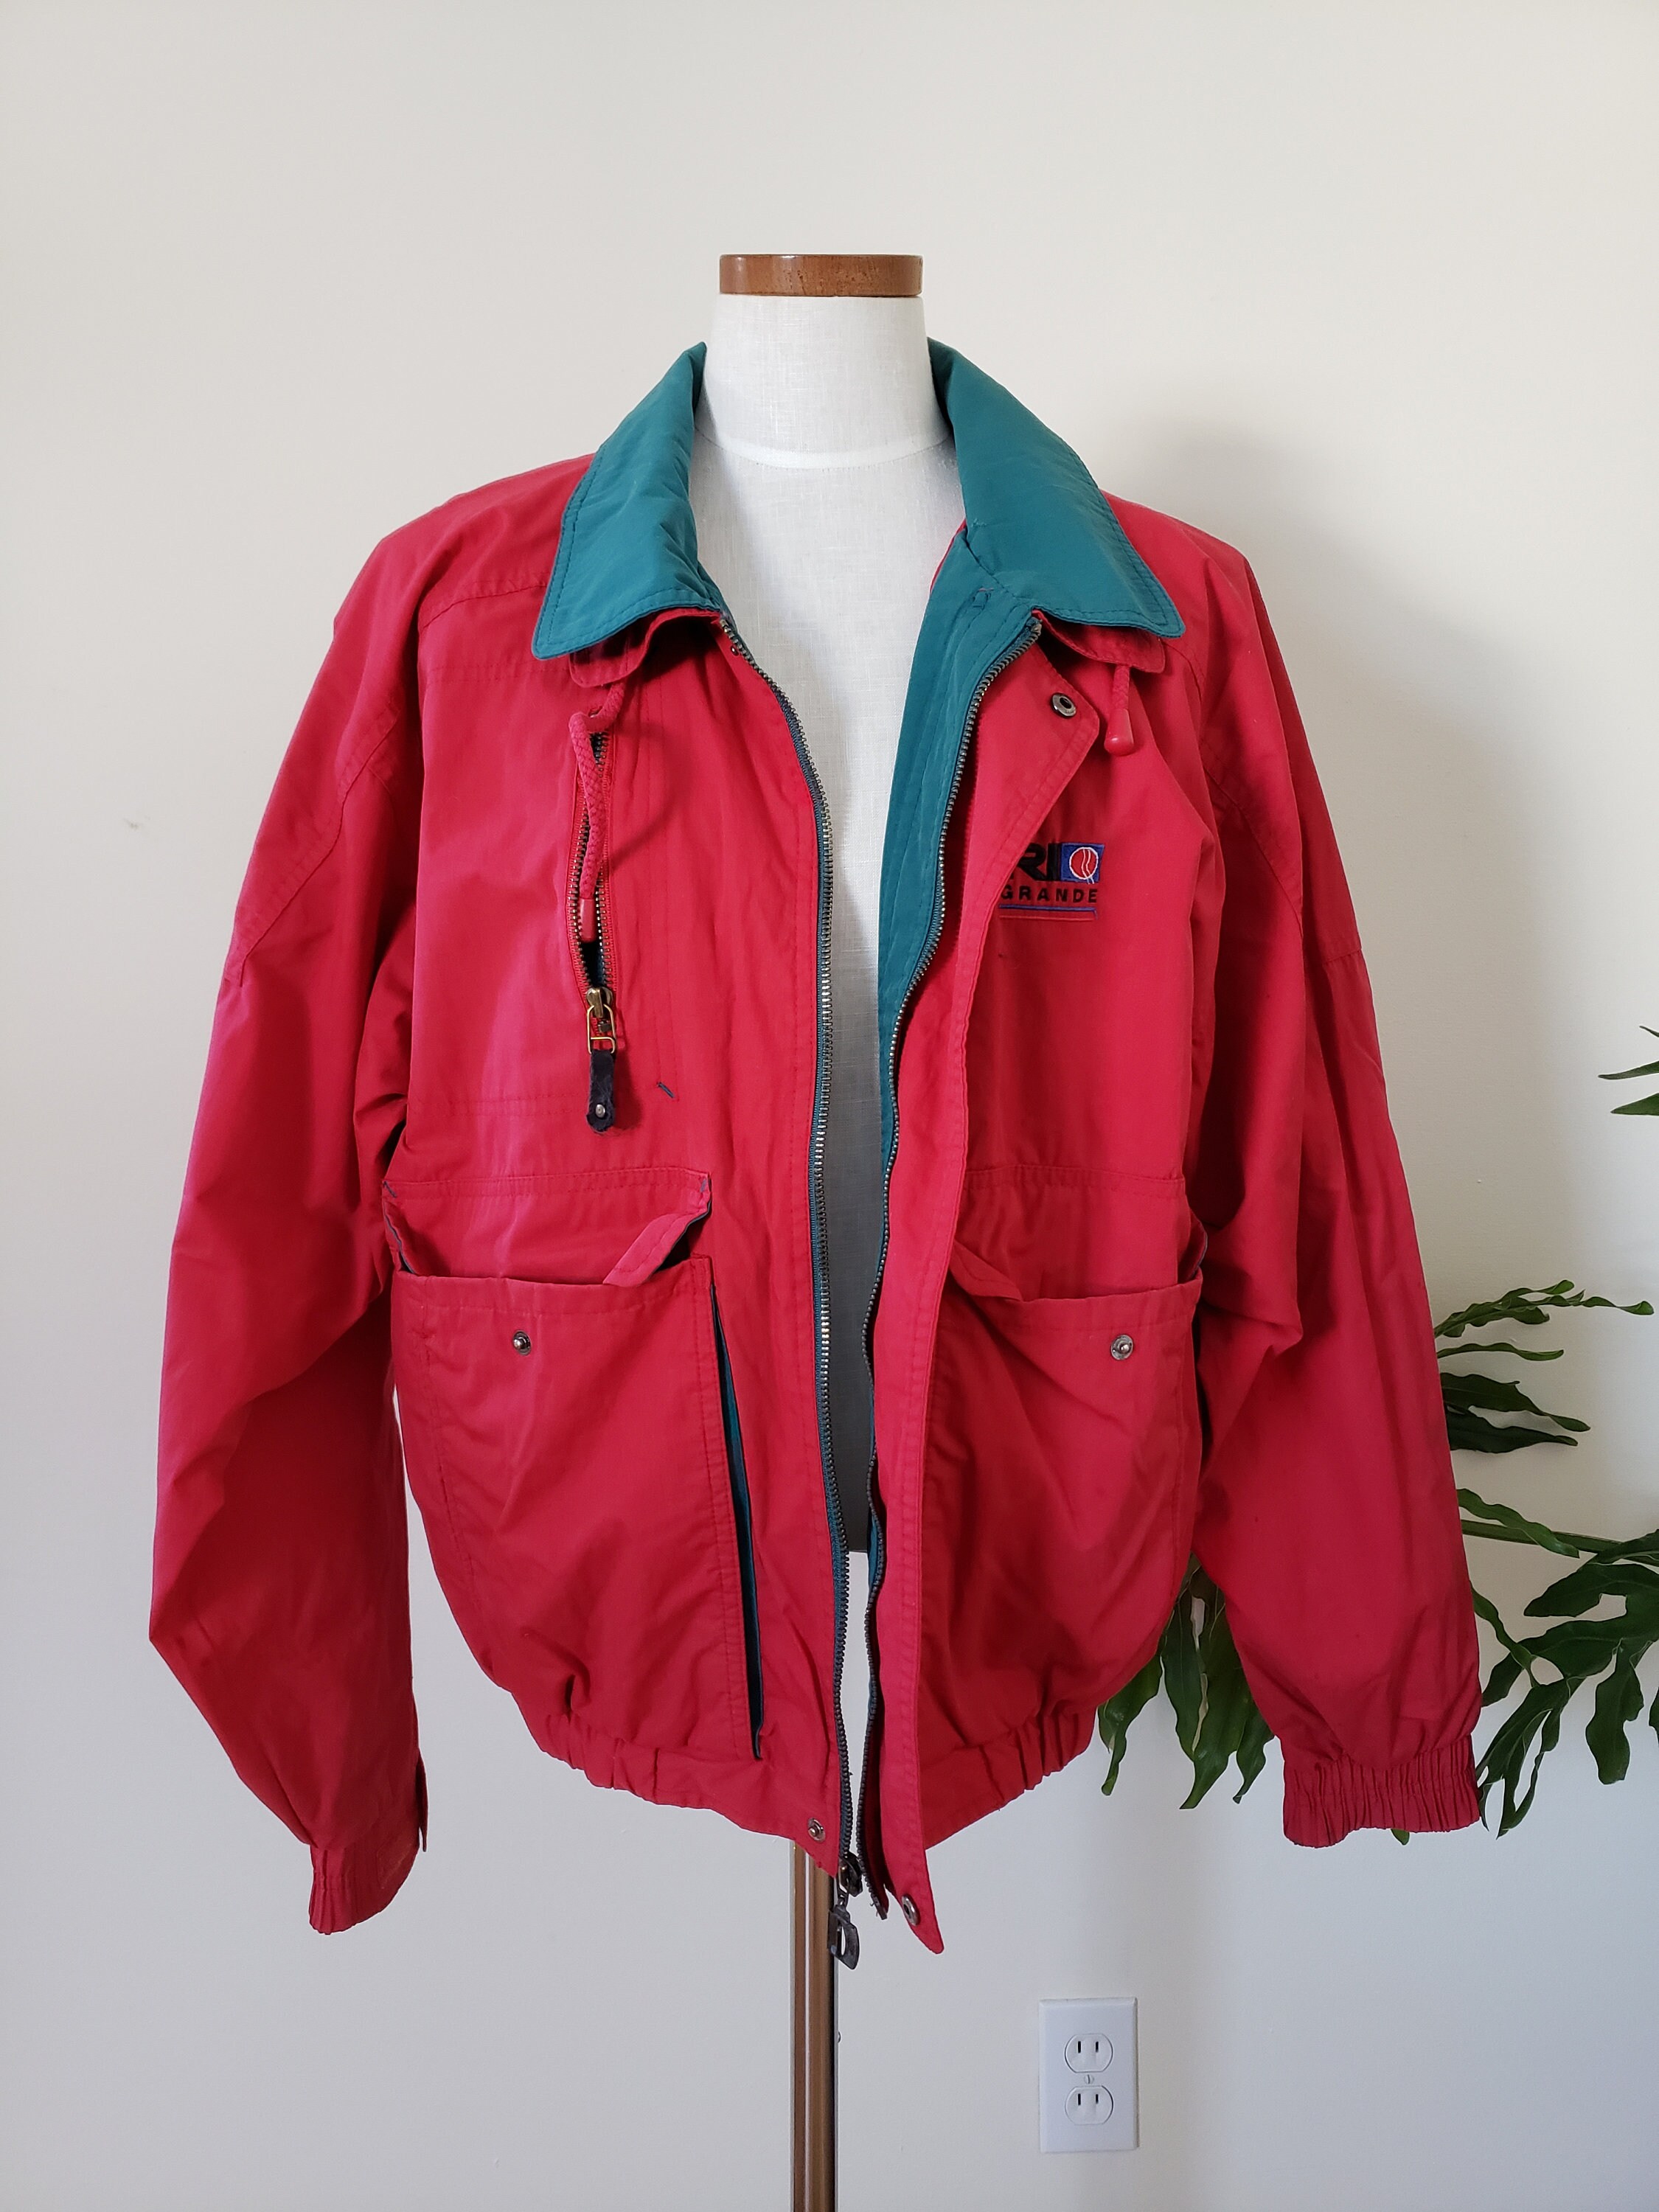 1980s Red and Green Windbreaker Jacket With SIX Pockets - Etsy